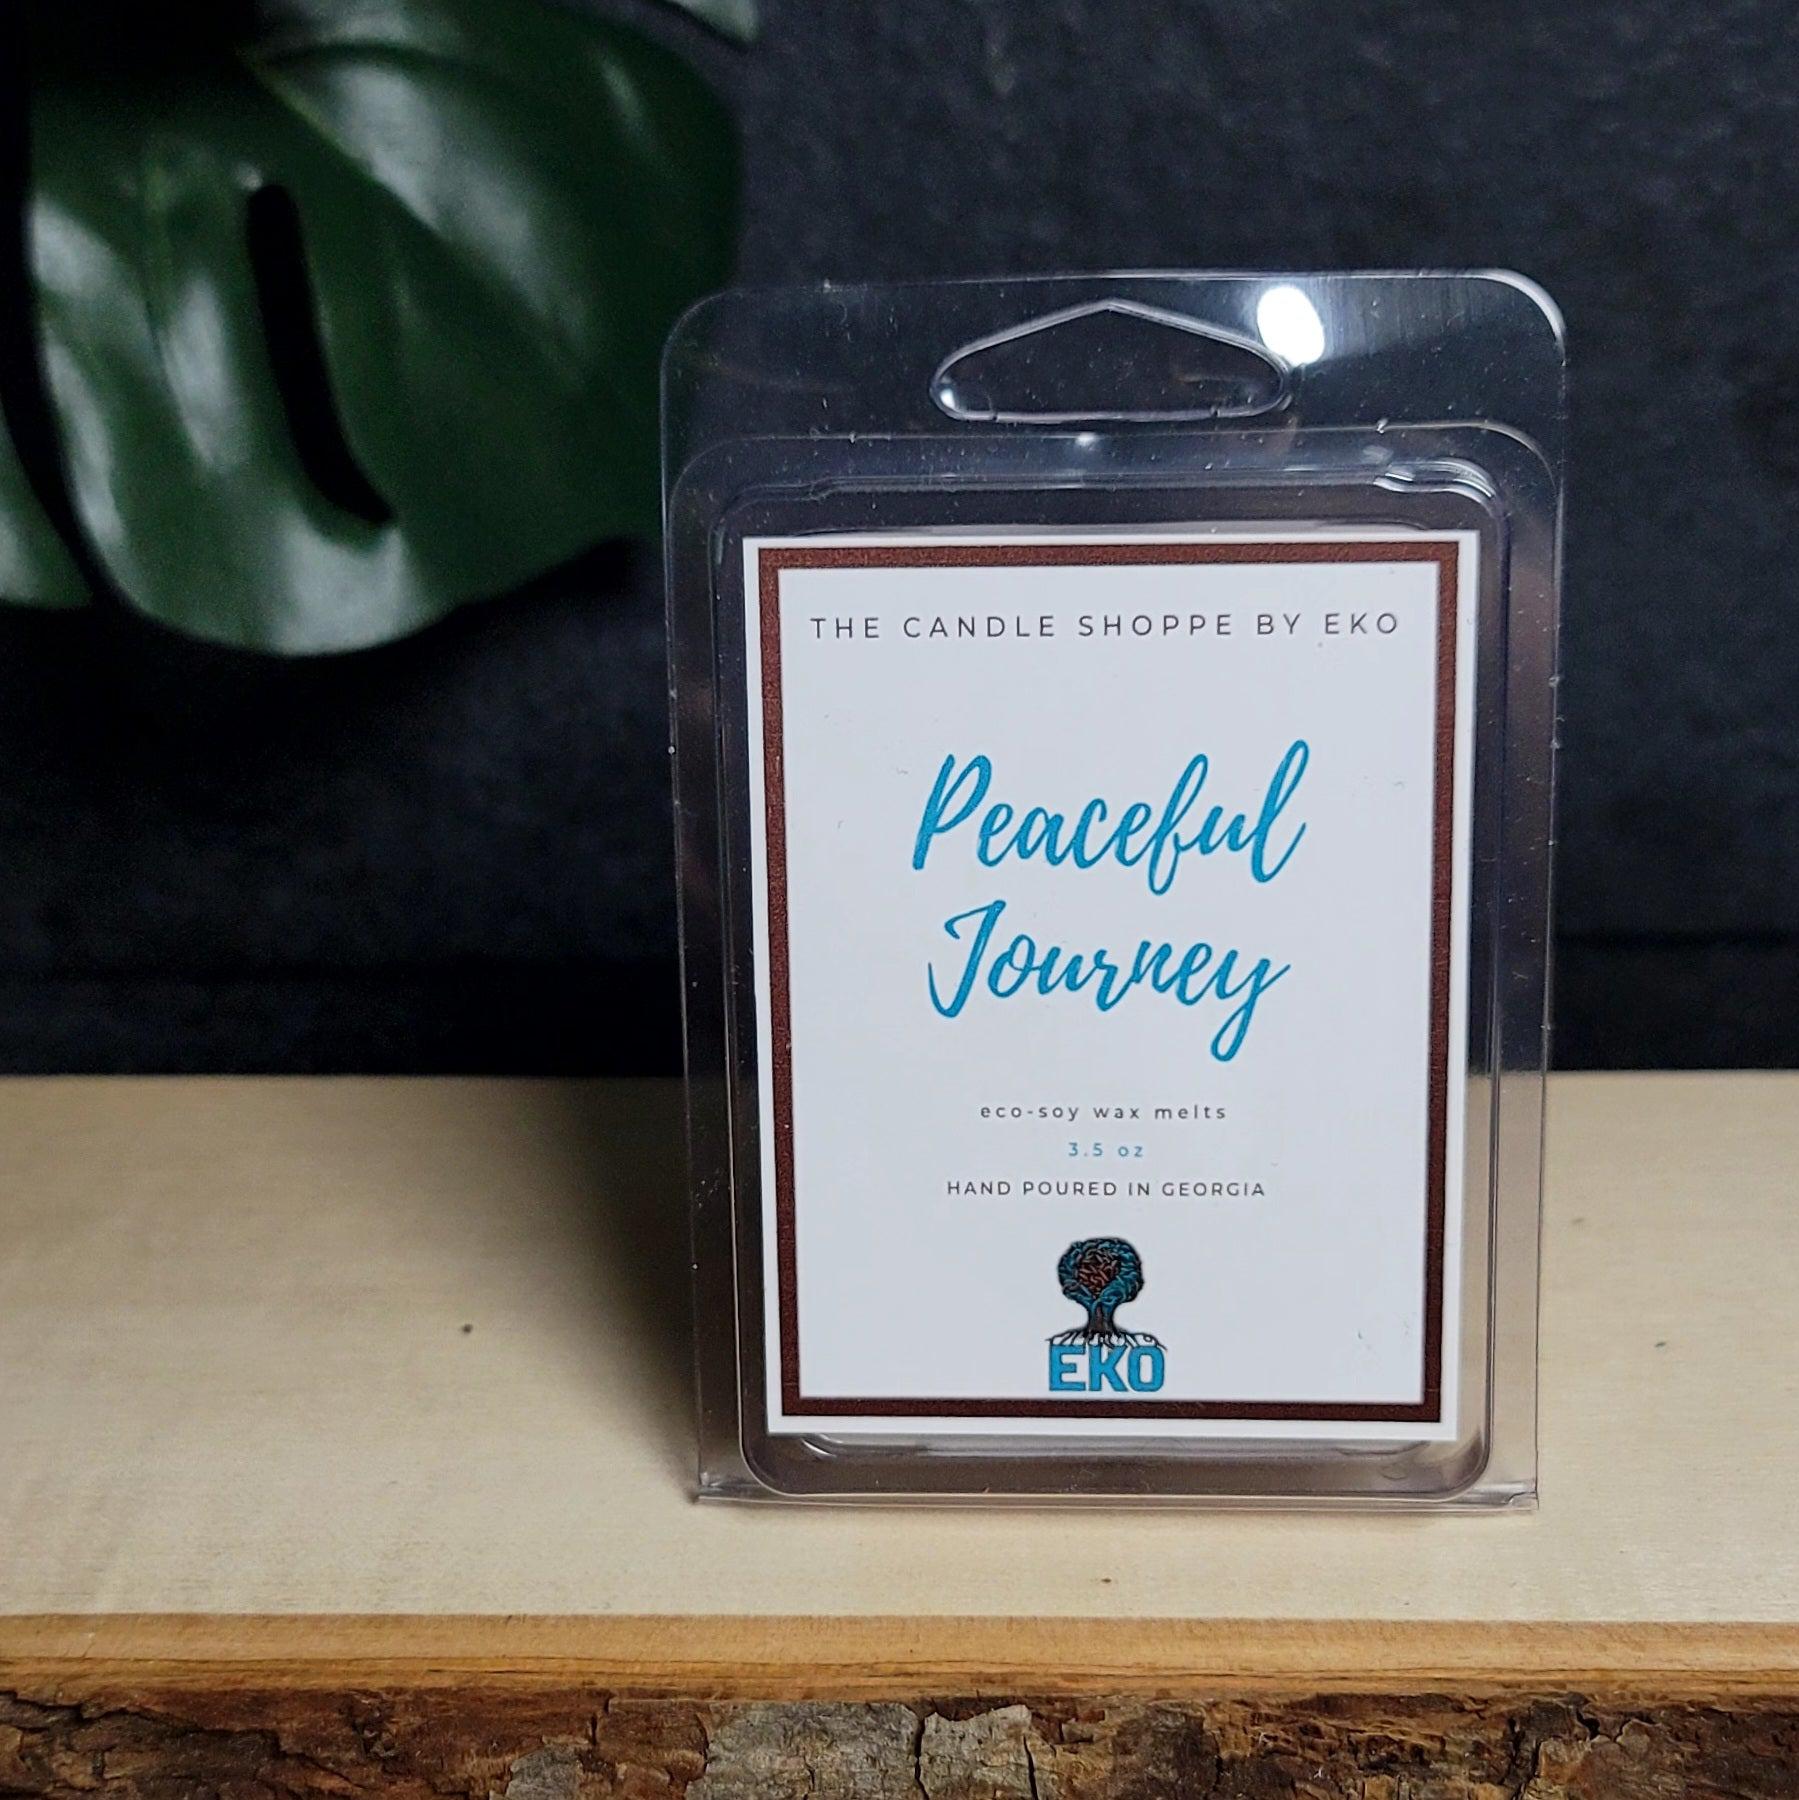 Peaceful Journey Candle